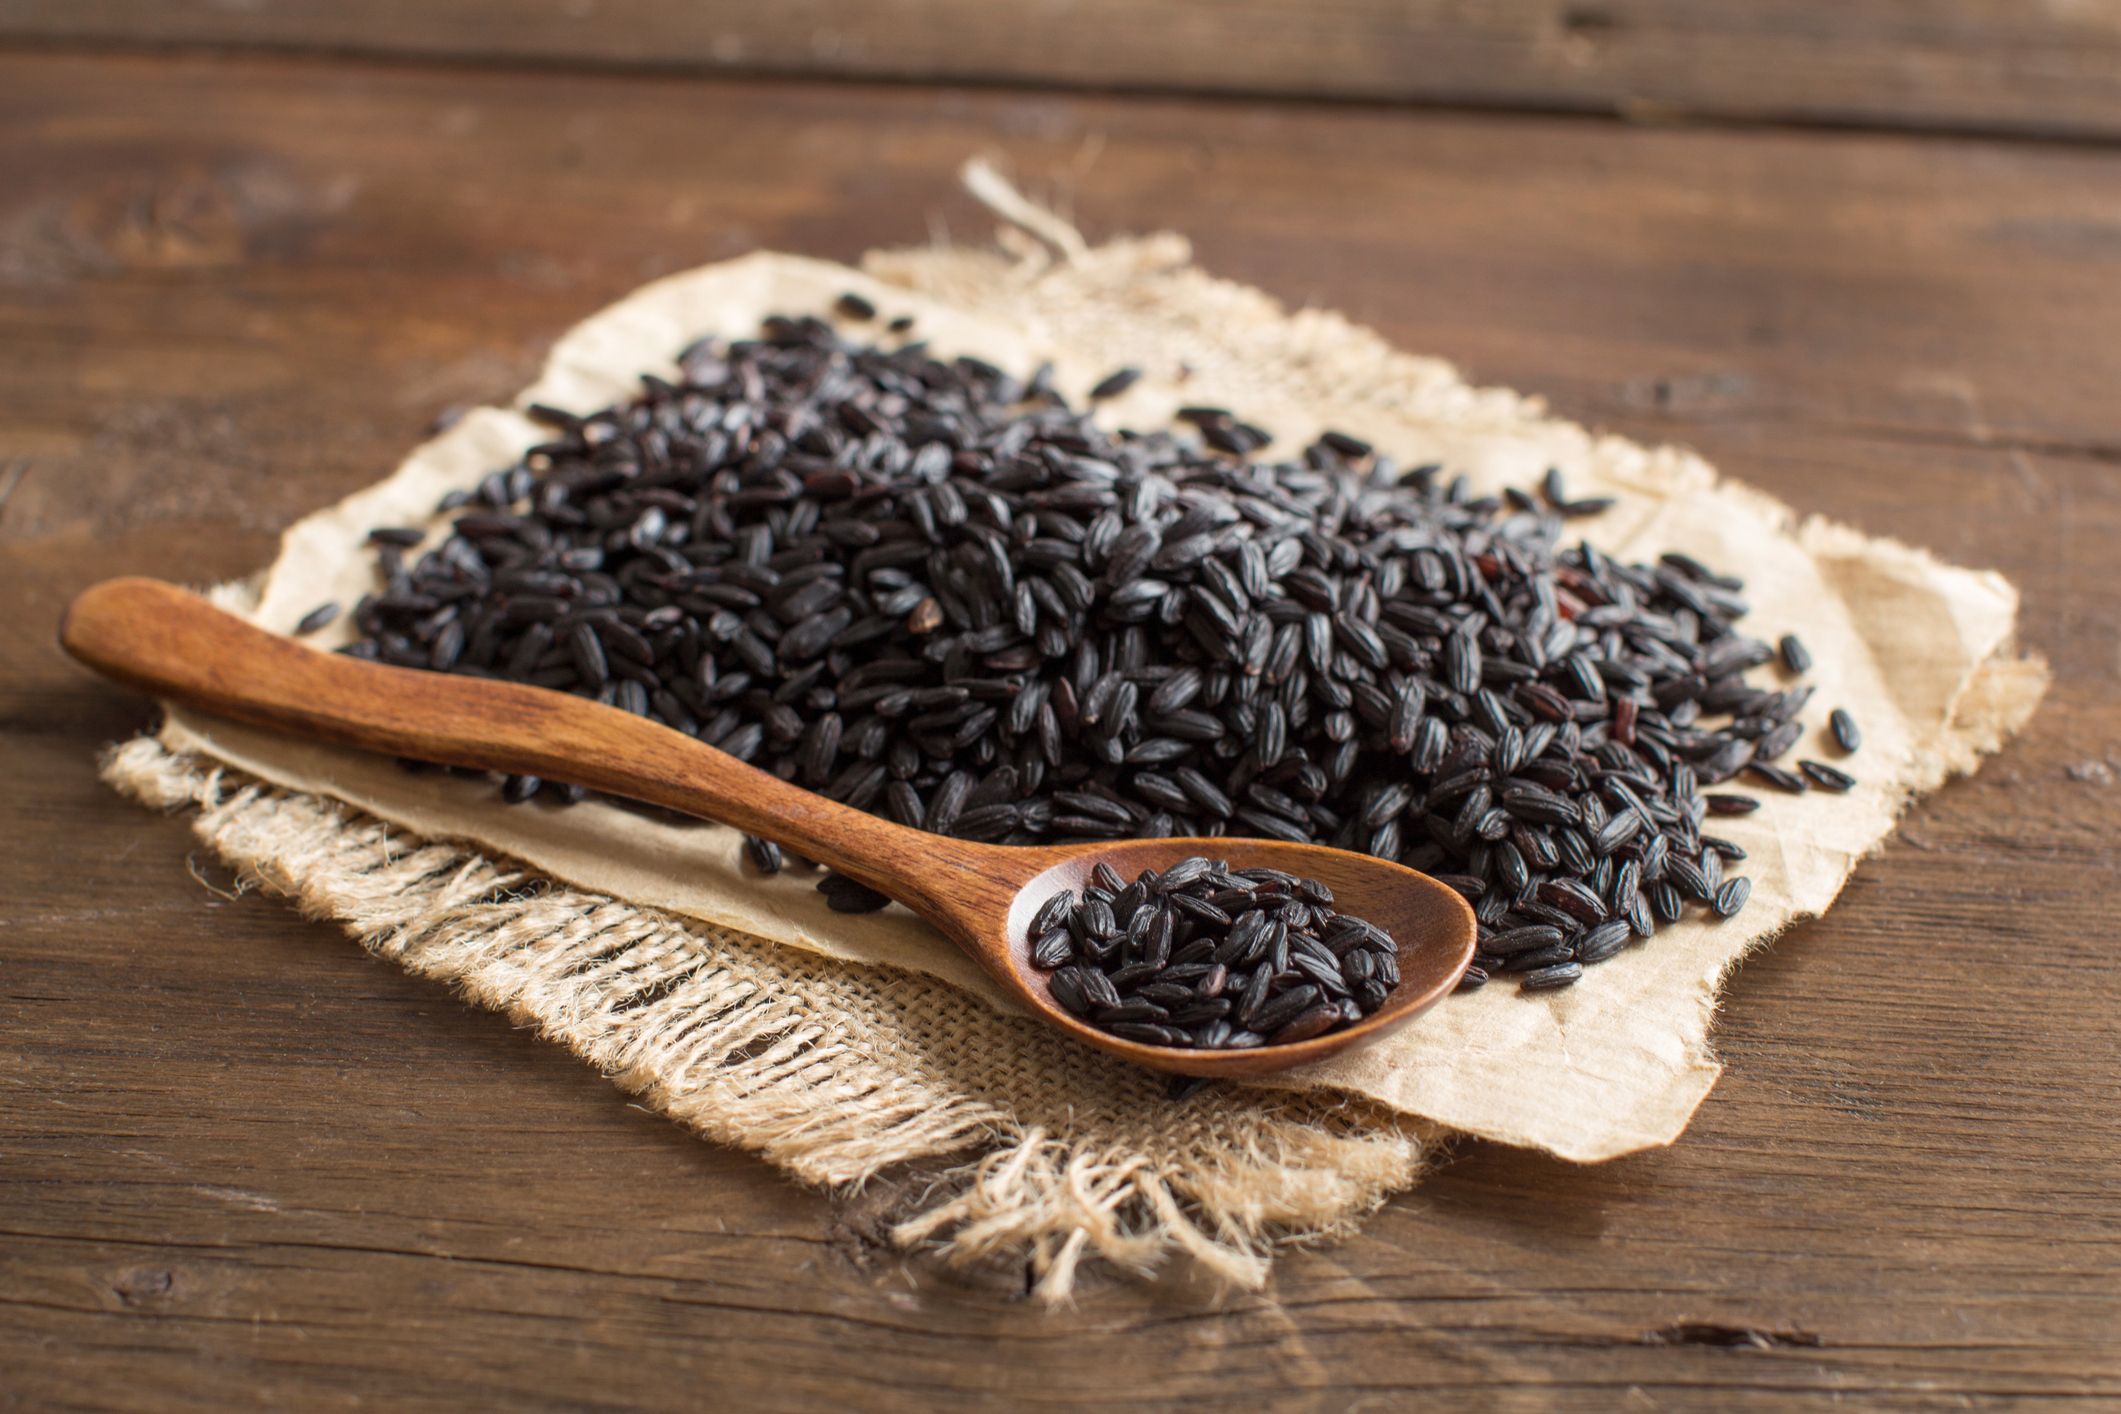 Forbidden Rice 101: Black Rice Nutrition, Benefits & How to Cook It